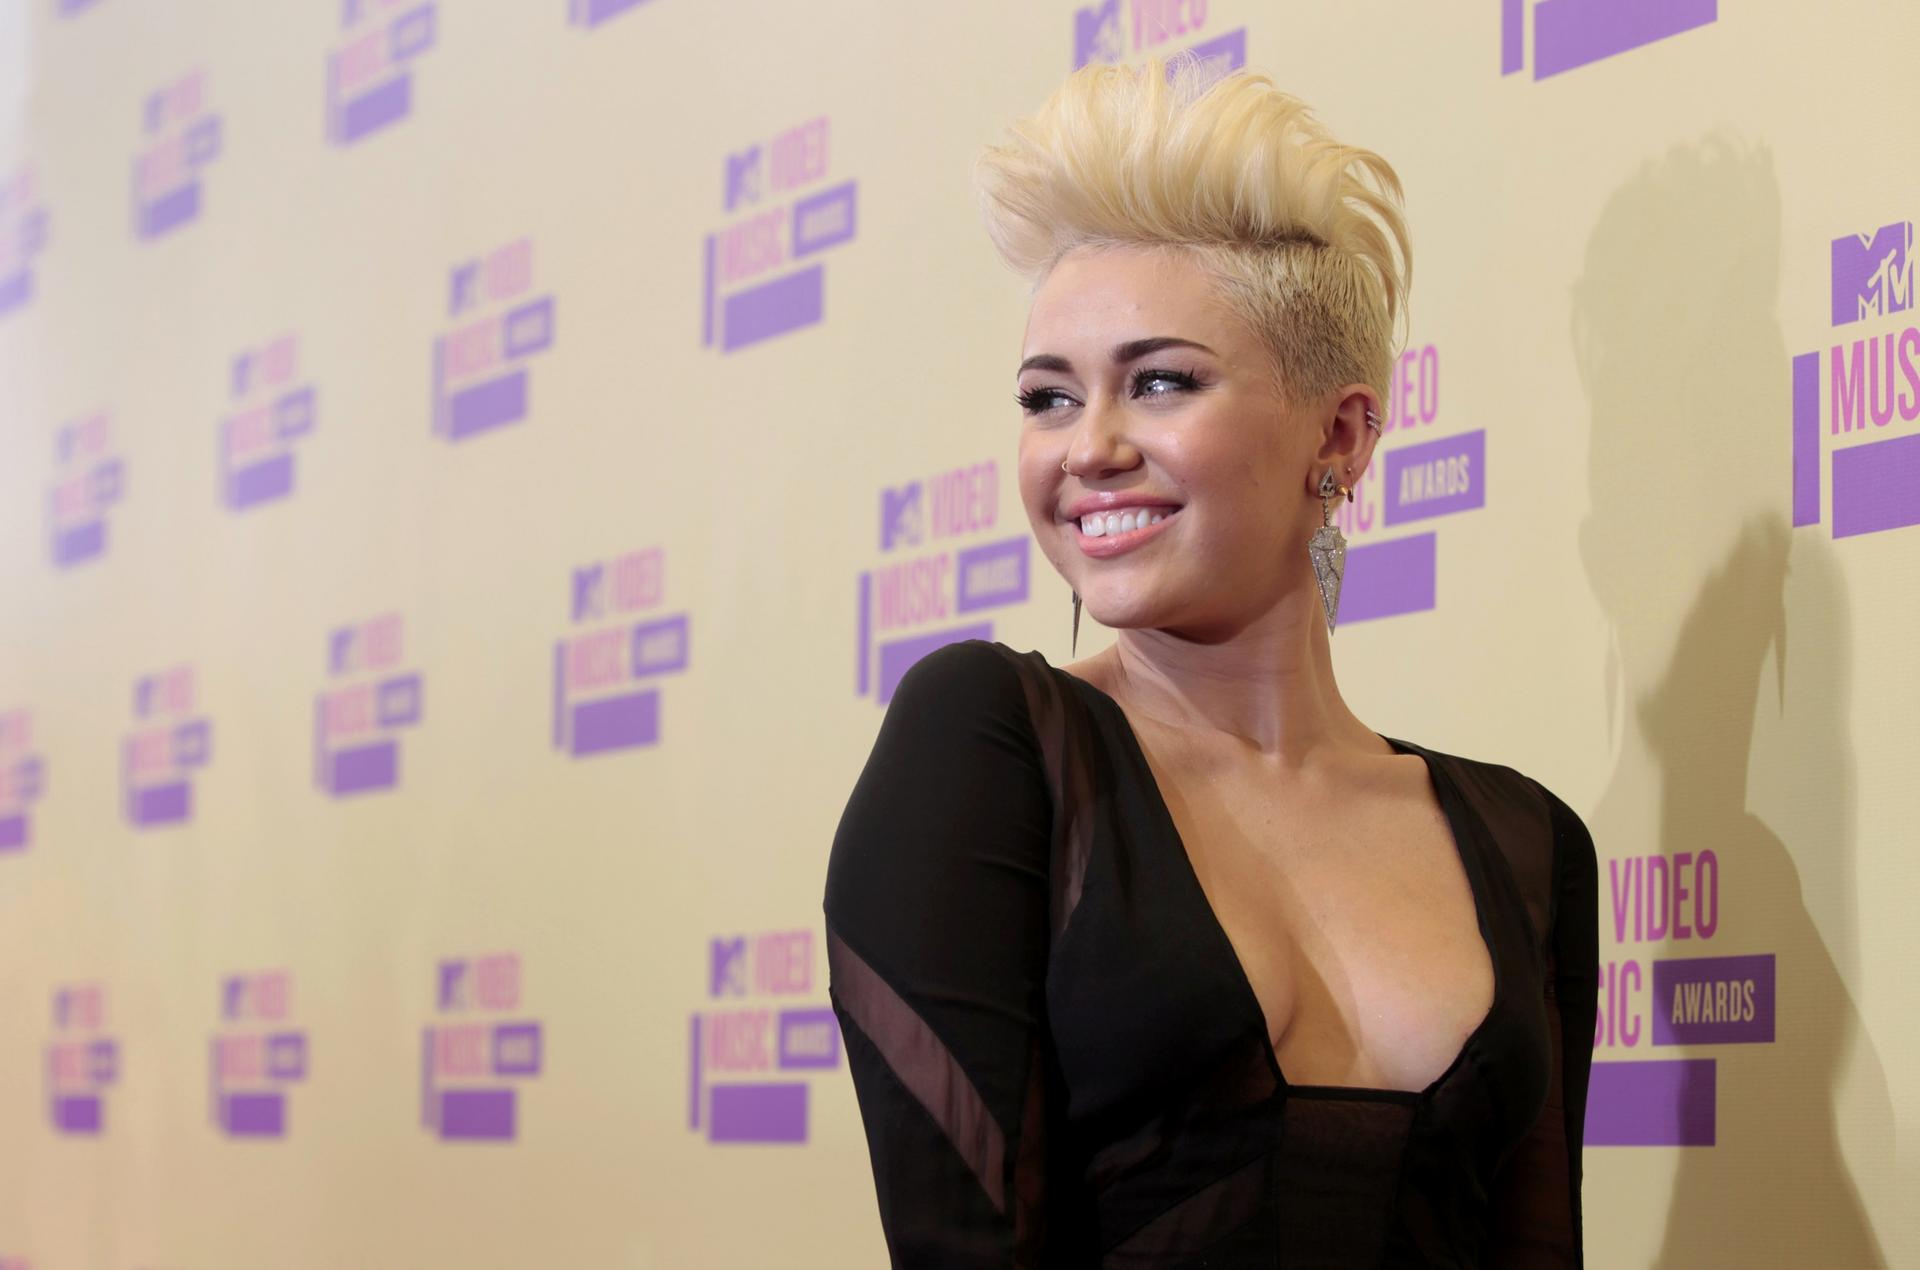 Miley Cyrus' constant haircut updates So this is life afterHannah Montana?